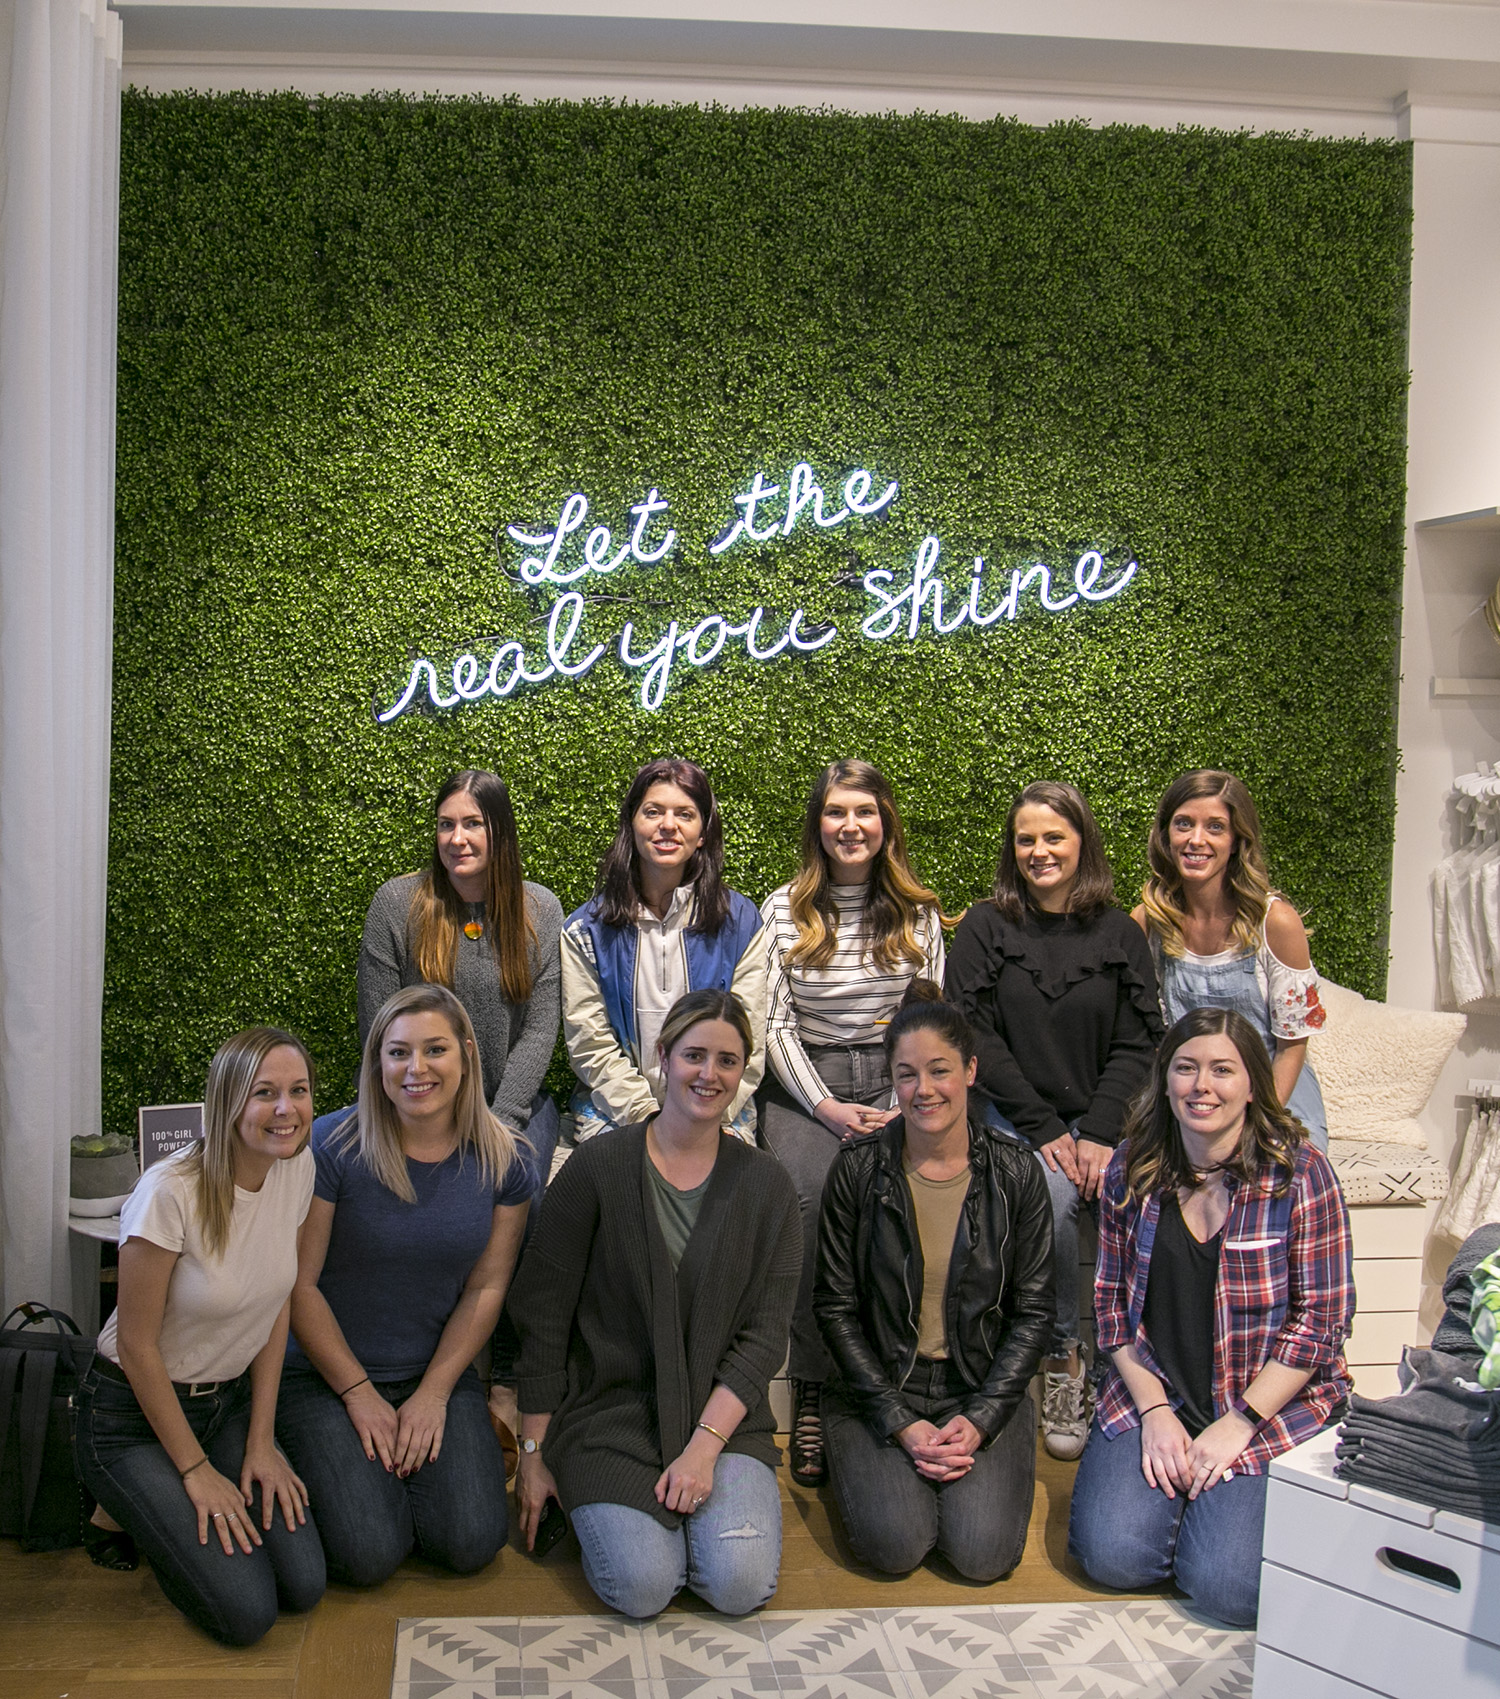 Introducing... An All-New Aerie Store Design!